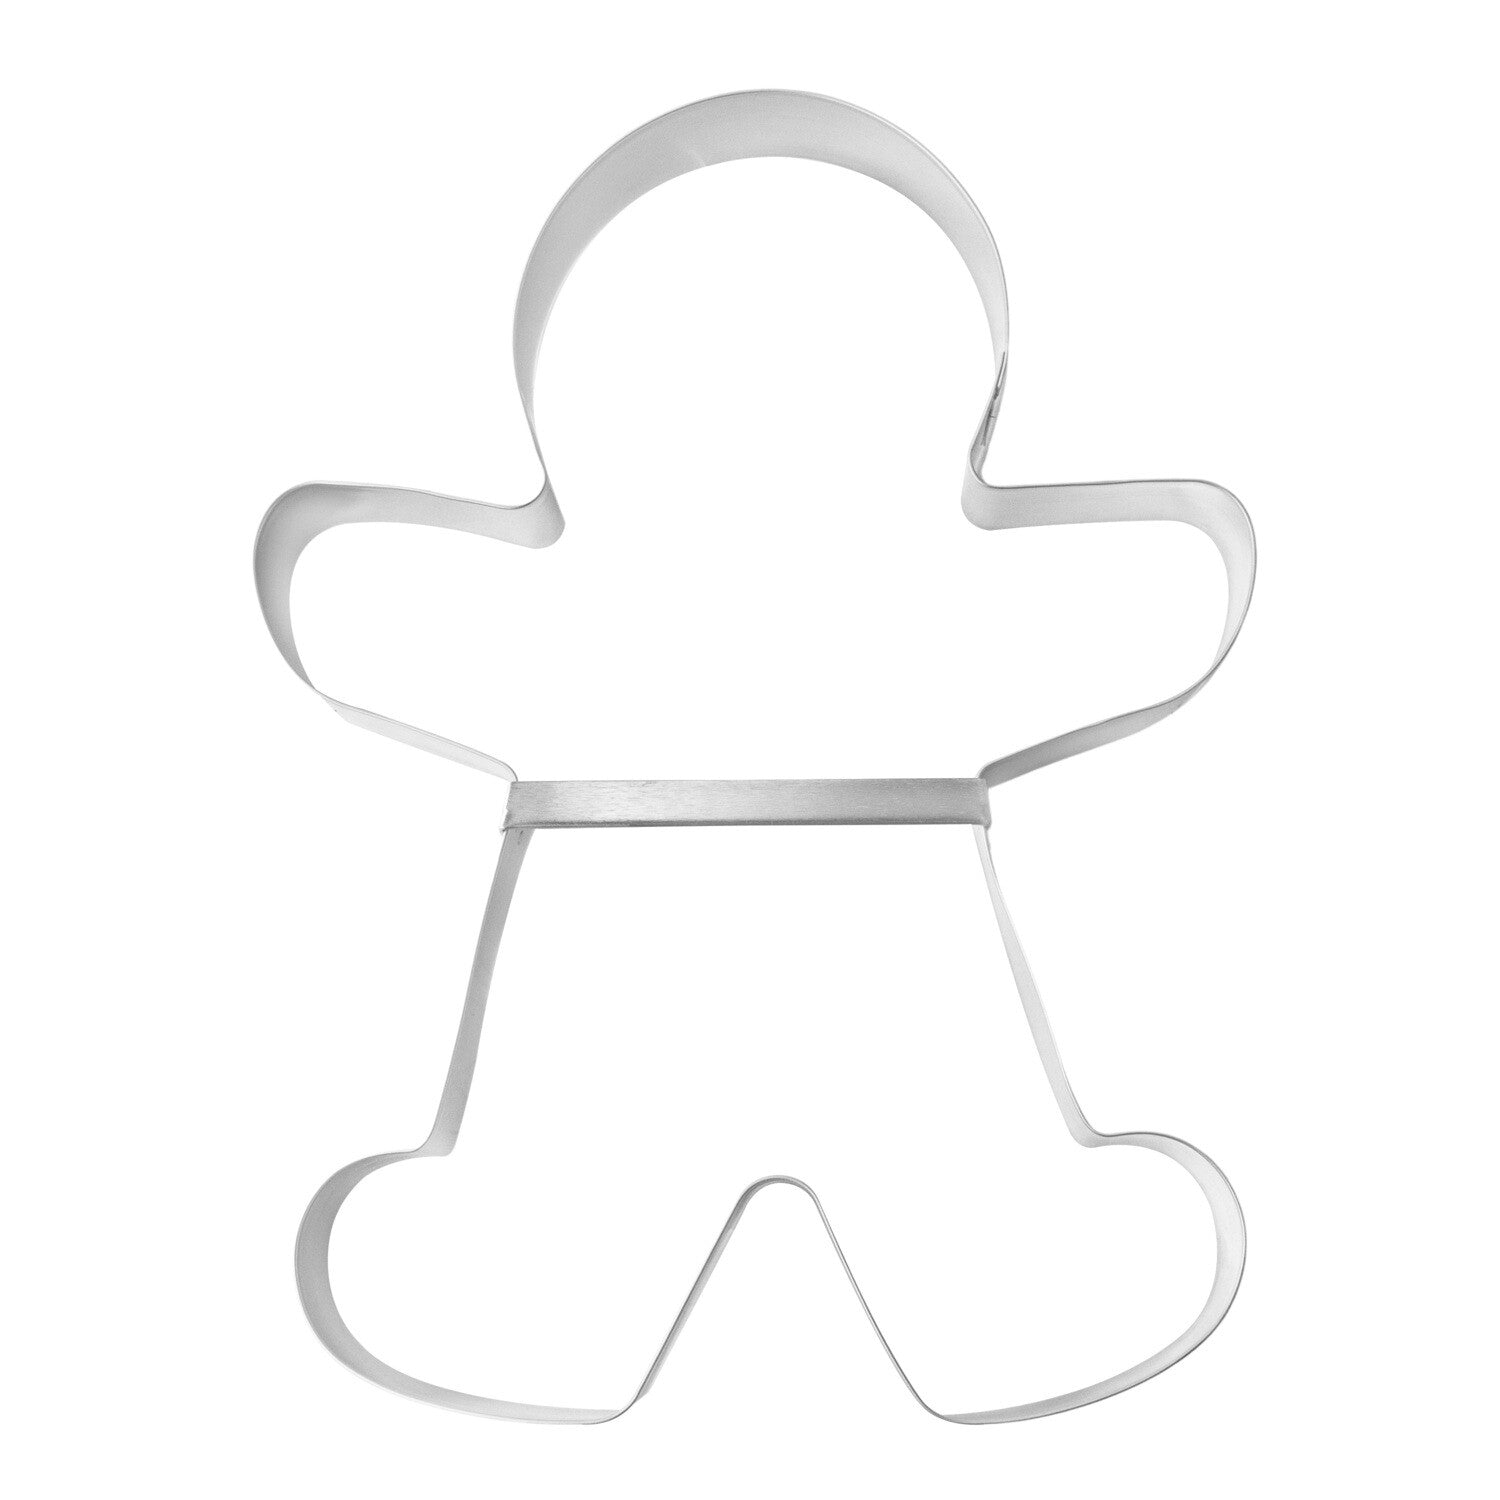 Jumbo Gingerbread Man Cookie Cutter With Sprinkle Bundle The Flour Box 8452